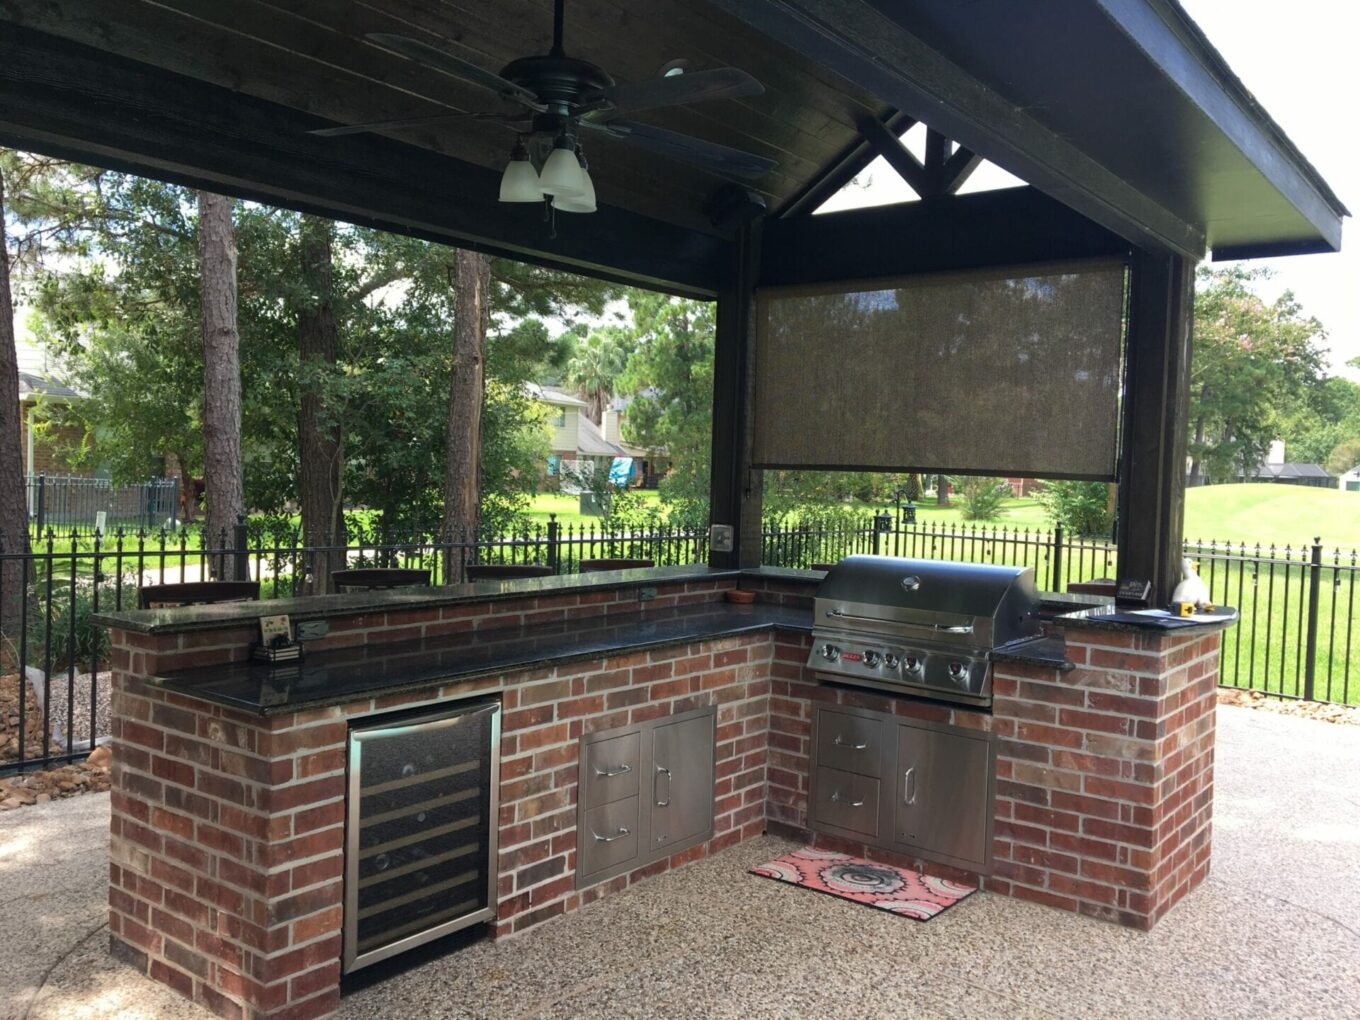 A grill in the middle of an outdoor patio.